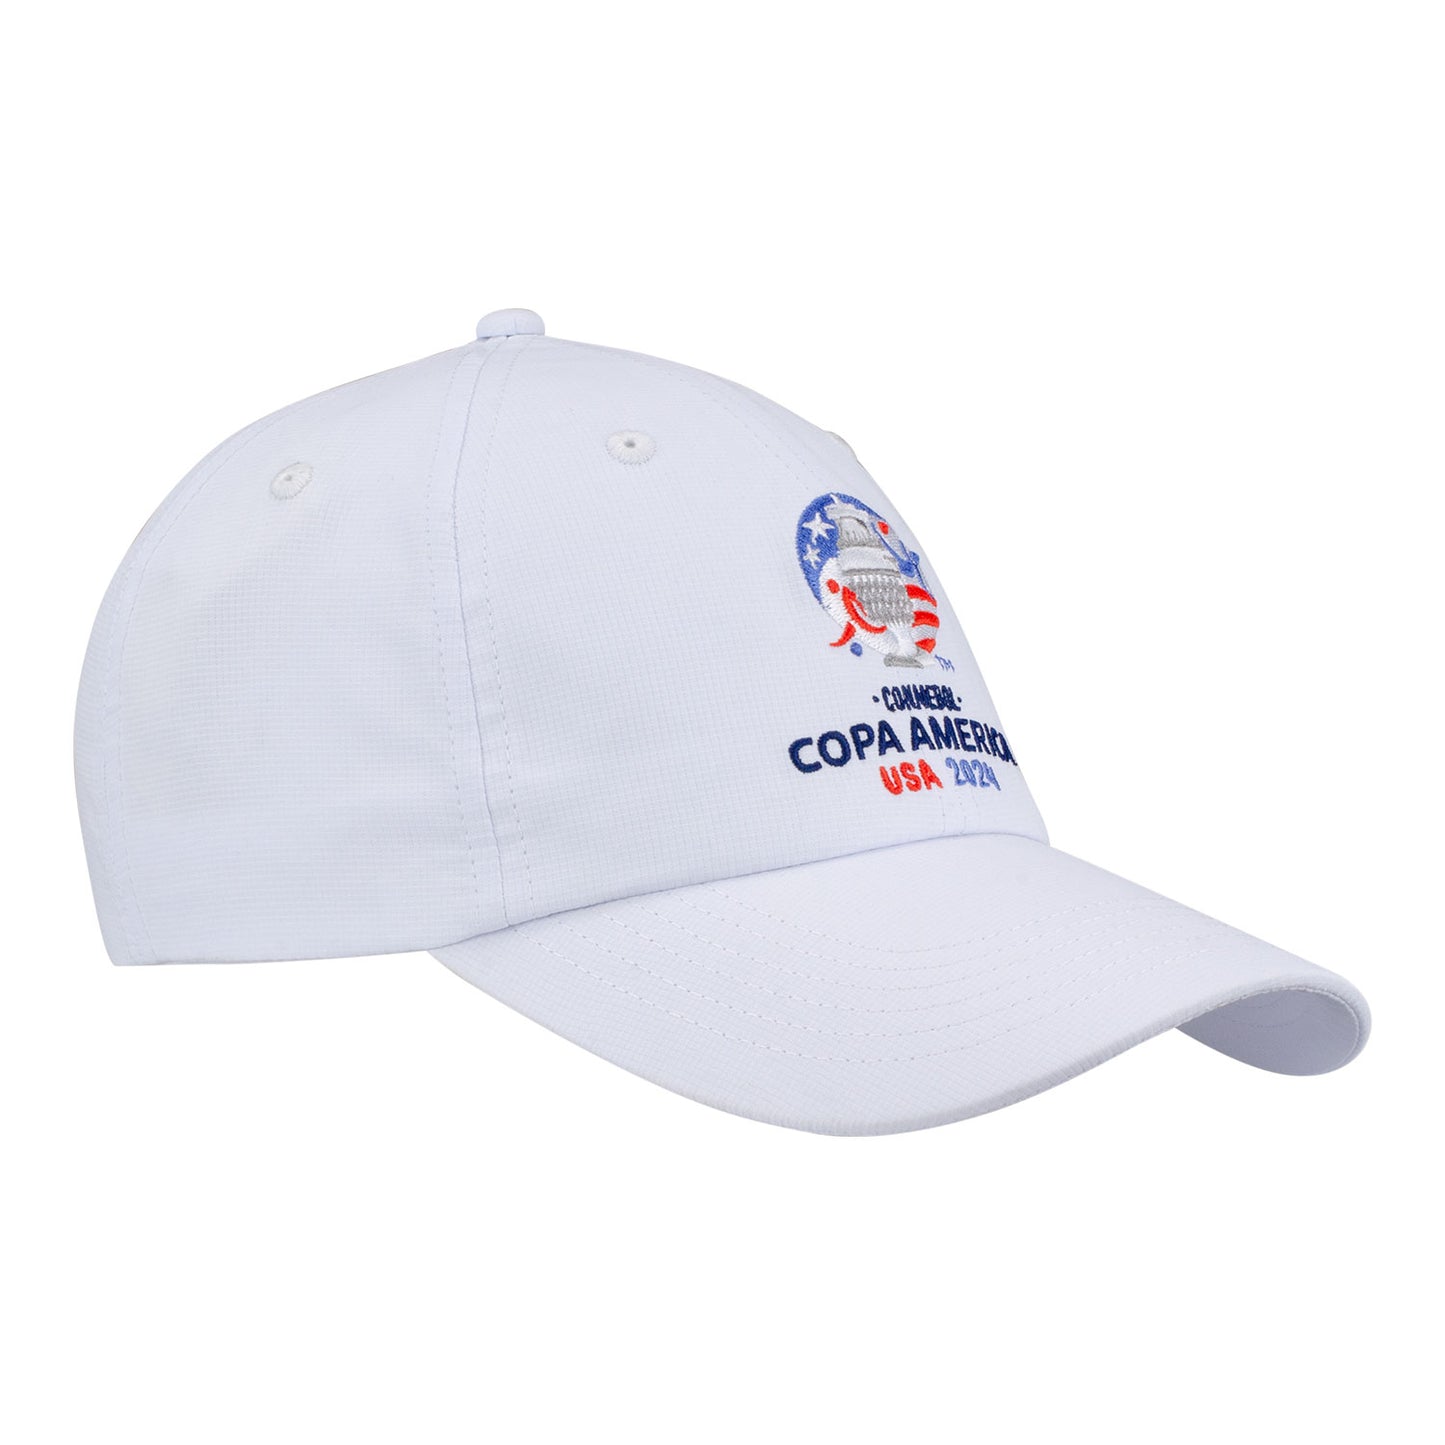 Copa America White Embroidered Adjustable Hat